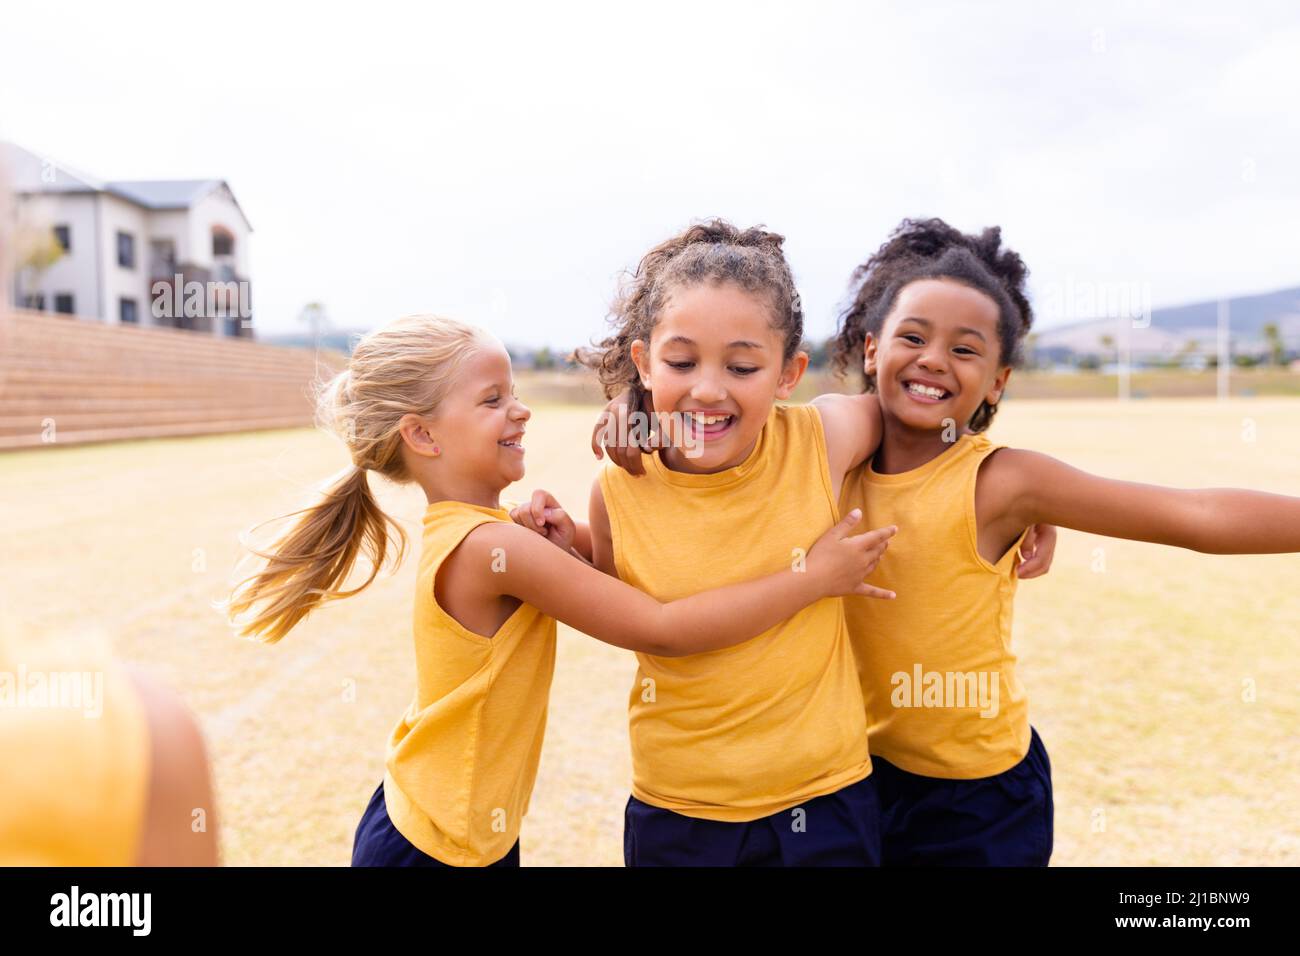 Cheerful multiracial elementary school girls in sports uniform on ground during soccer practice Stock Photo